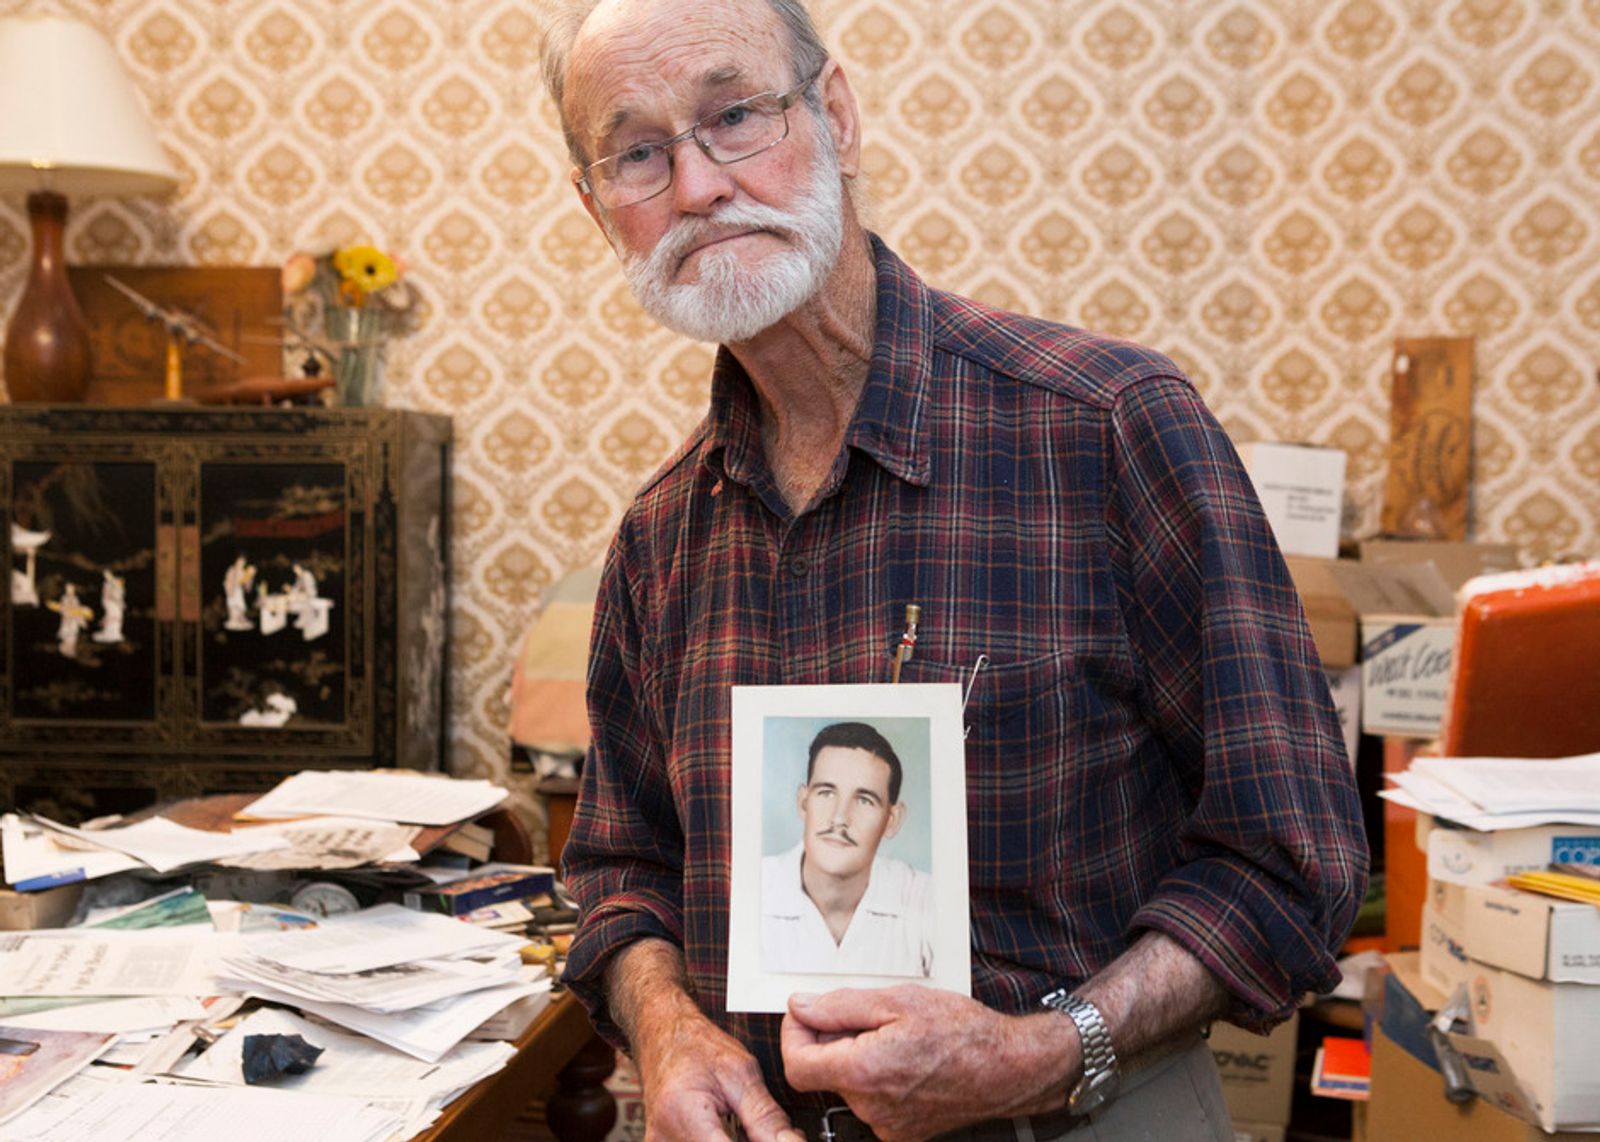 © Jessie Boylan - Avon Hudson holds a photograph of himself from 1954 at home in his archives room.